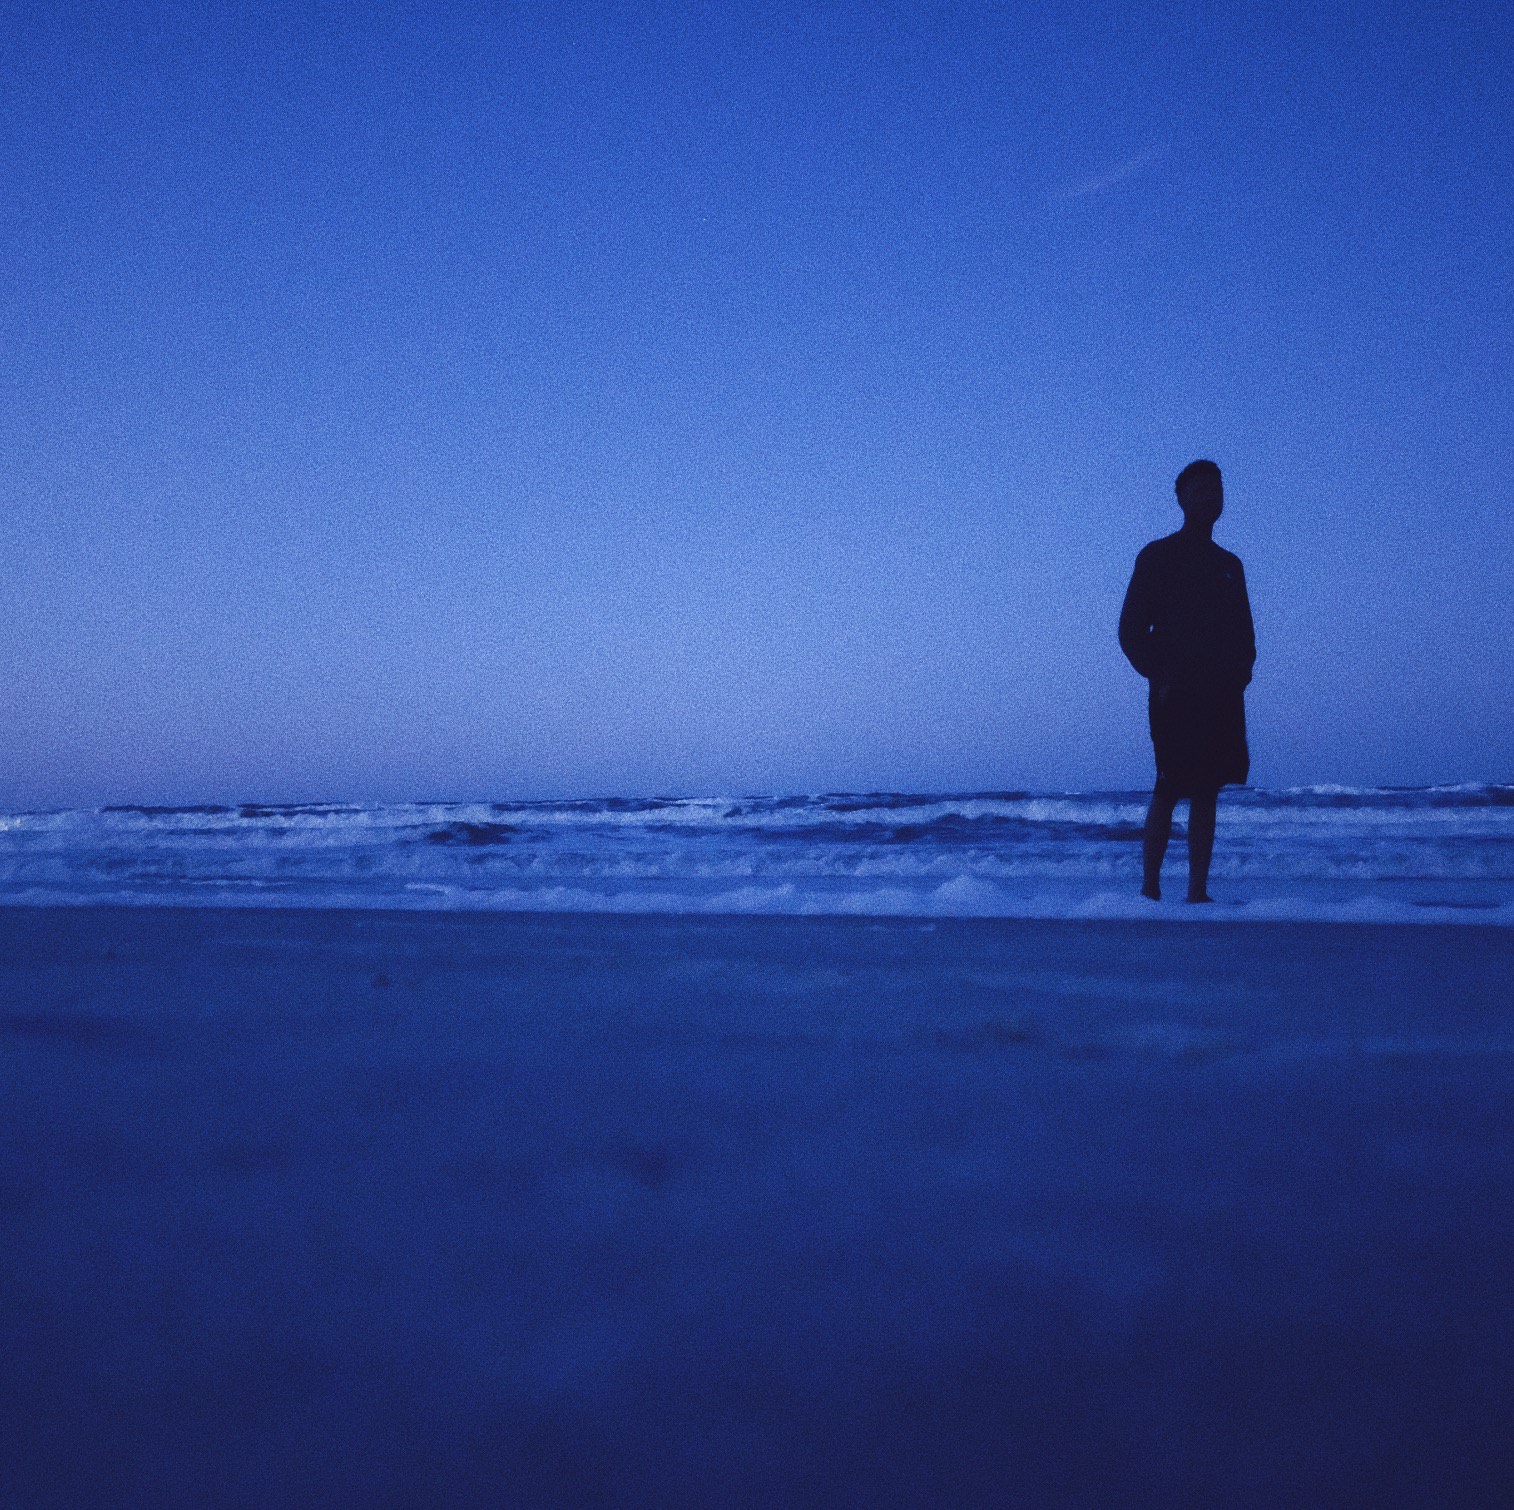 The beach during the night with the silhouette of a man on it. 